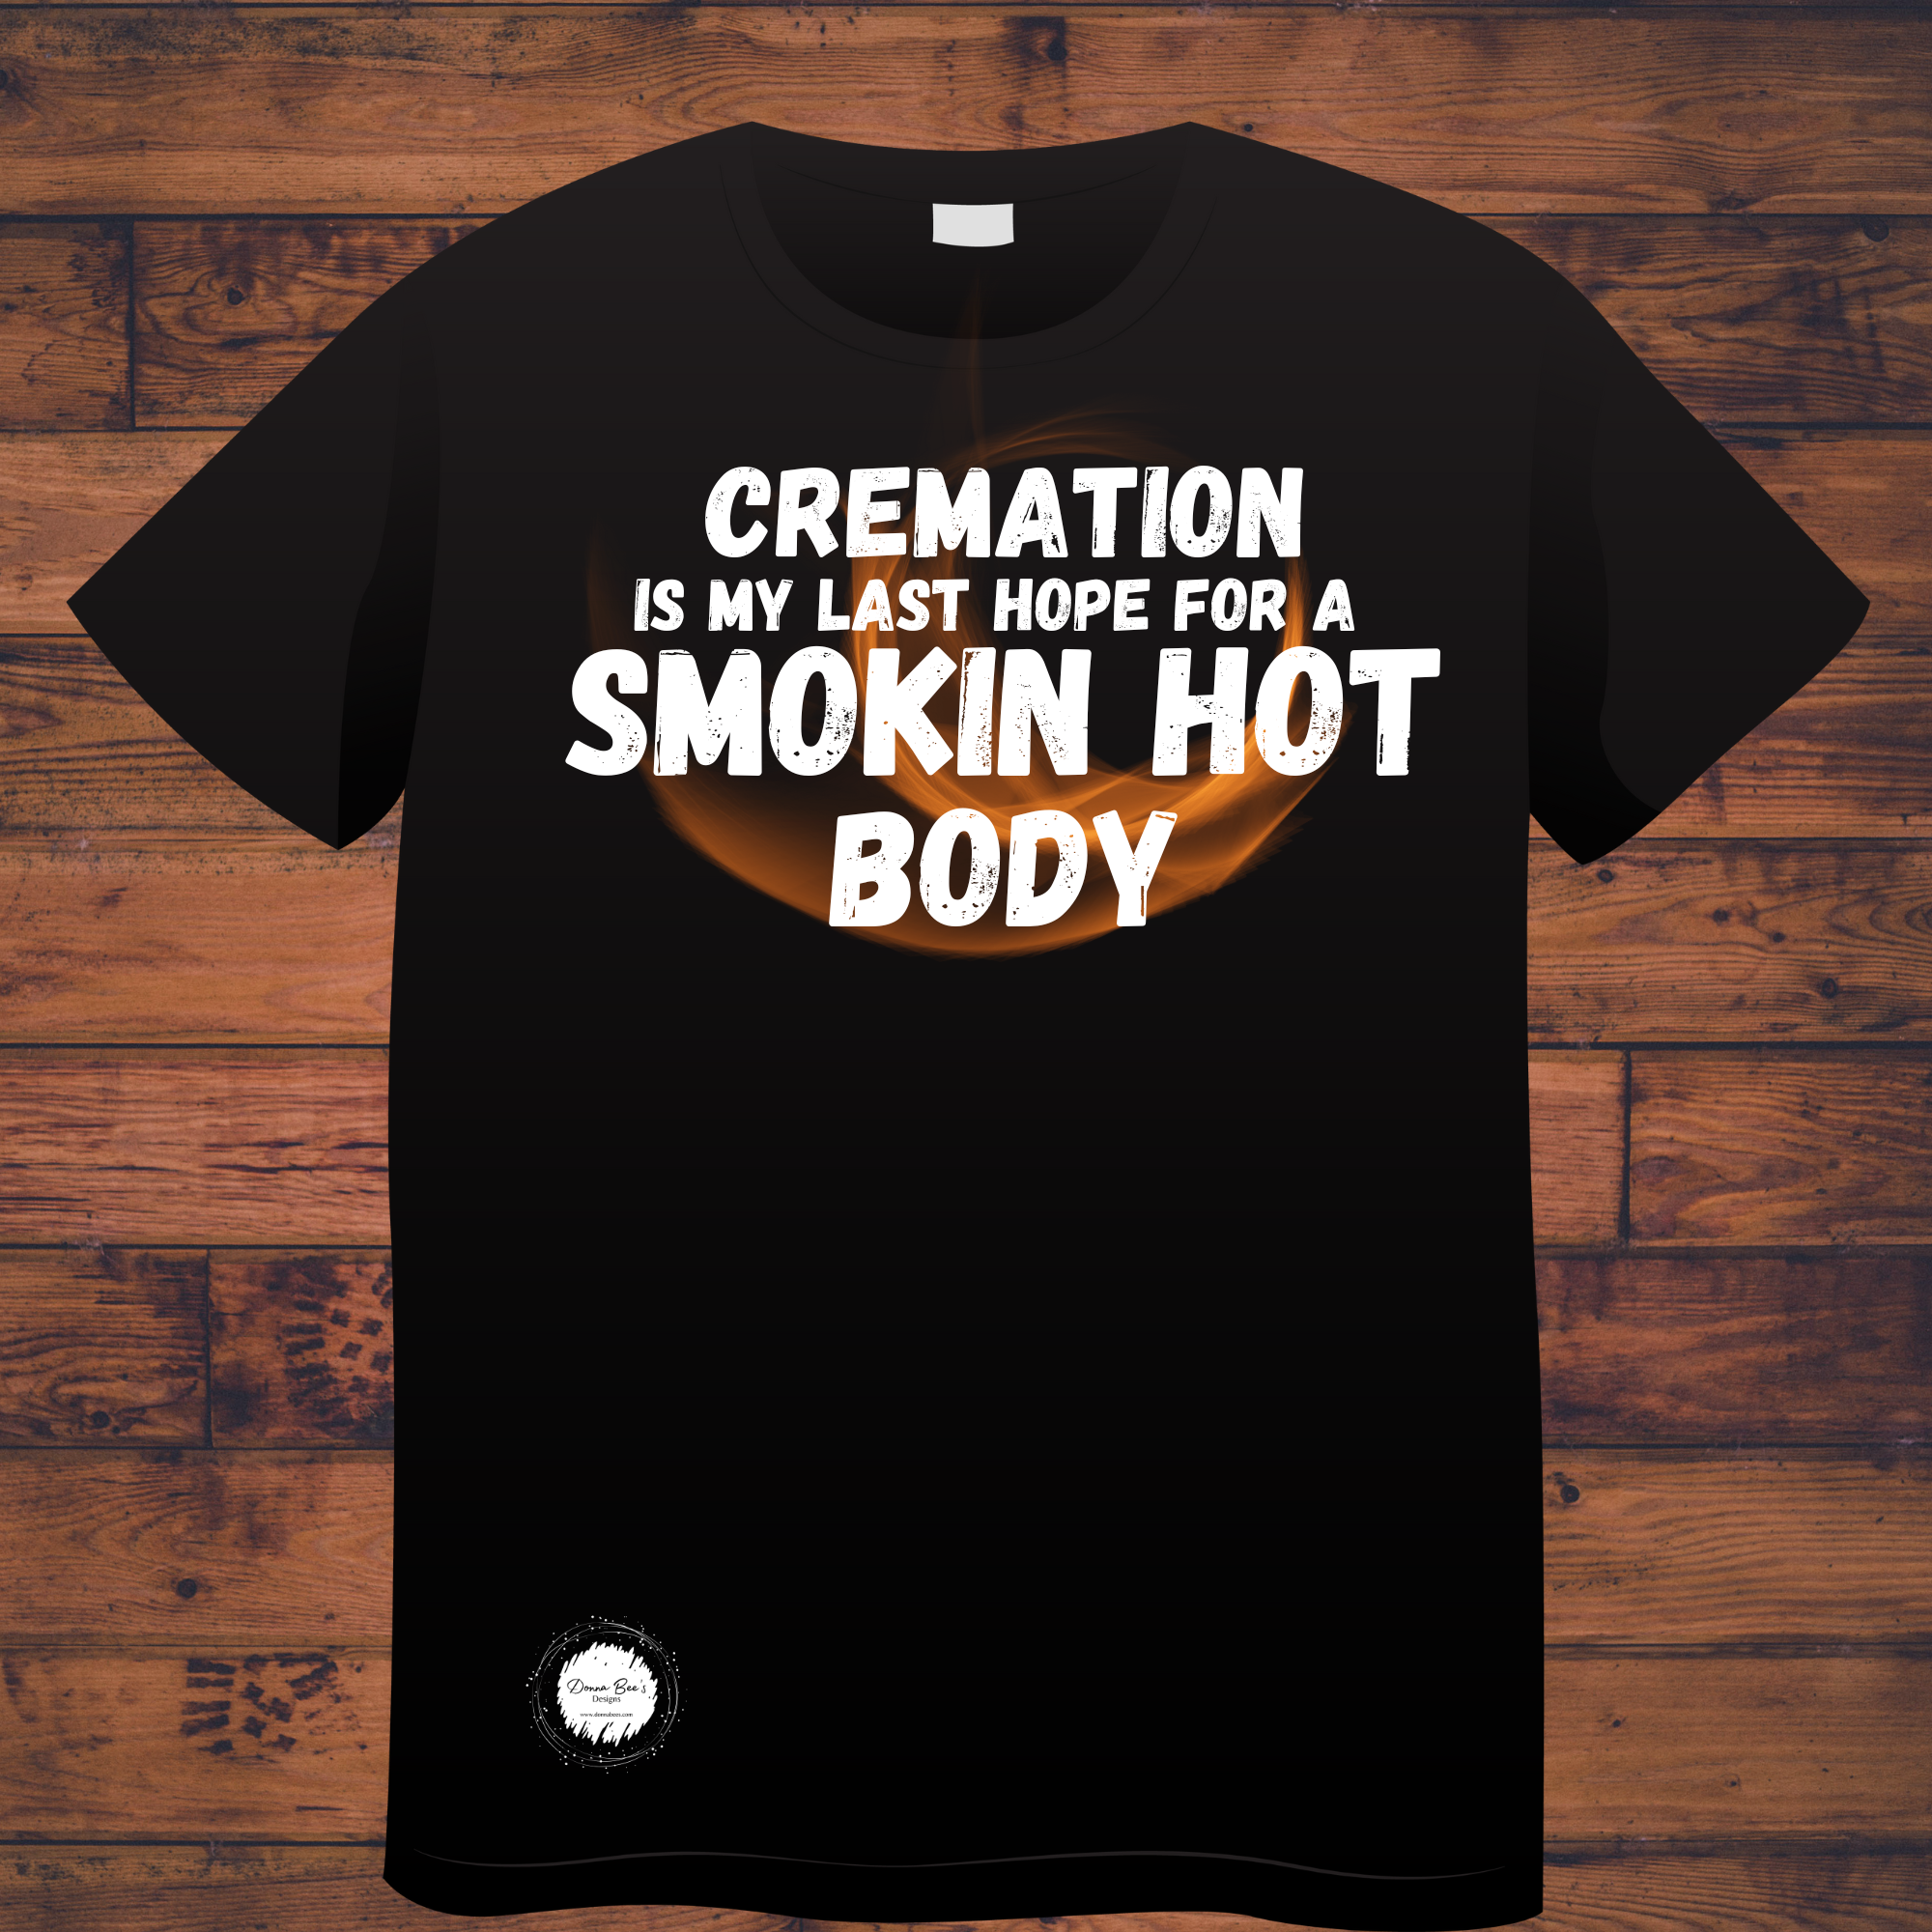 Cremation is my last hope for a smokin’ hot body